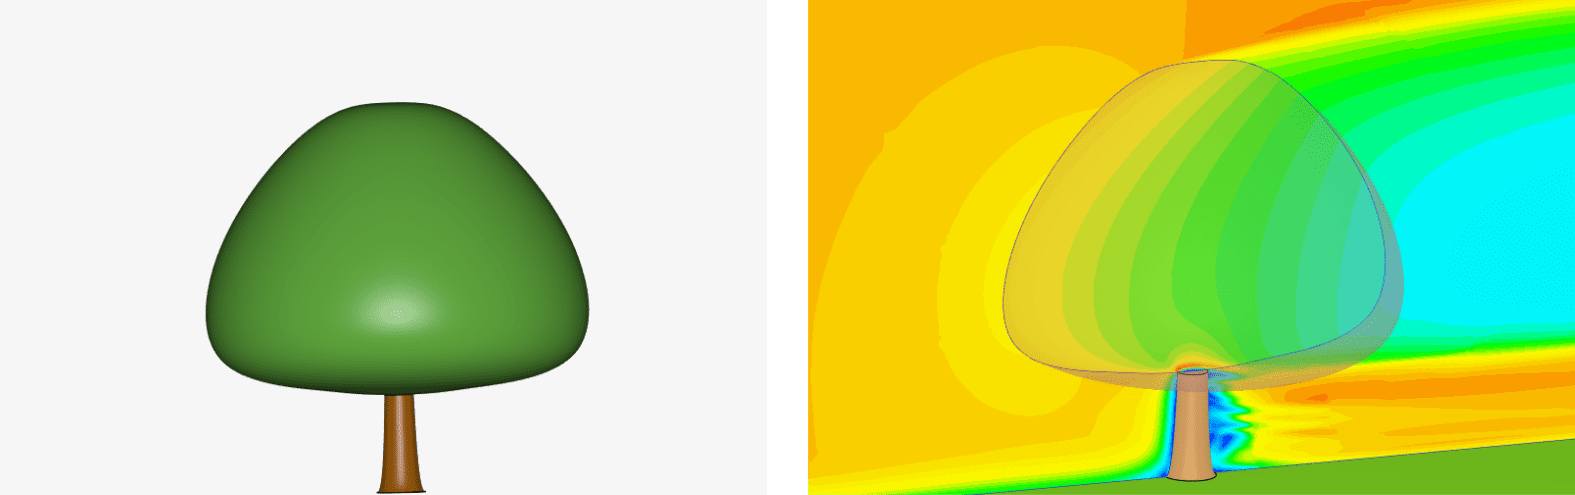 Example of a tree modeled as porous object in the wind comfort analysis